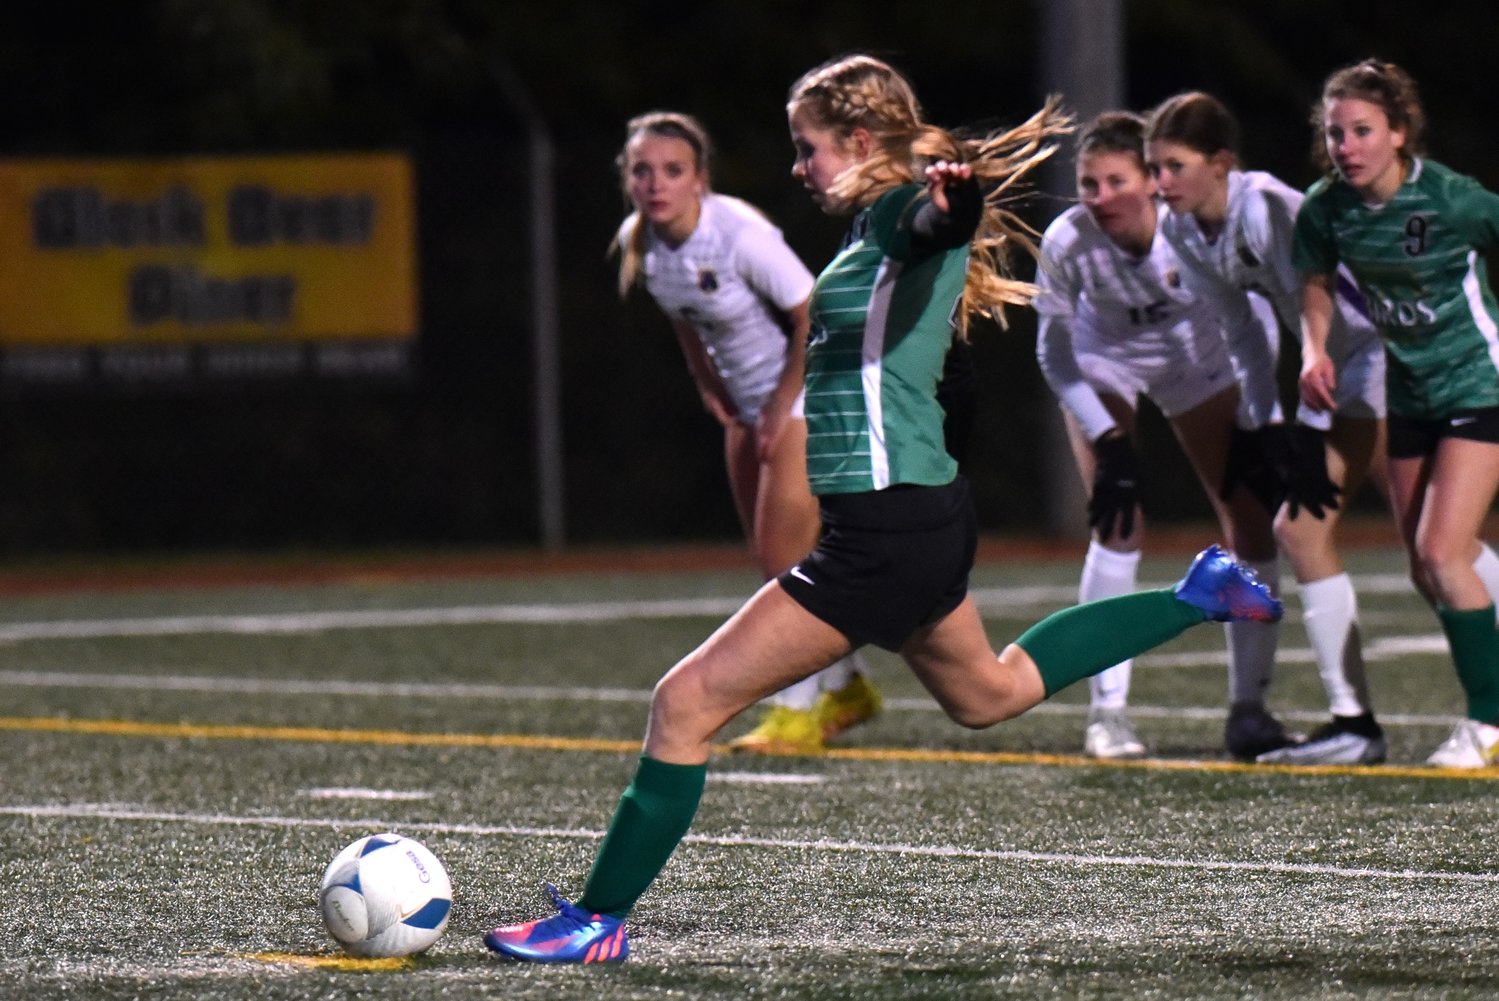 Kayla Pope takes a penalty kick to score Tumwater's lone goal in the T-Birds' 3-1 loss to Columbia River in the semifinals of the 2A state soccer tournament, Nov. 18 in Shoreline.